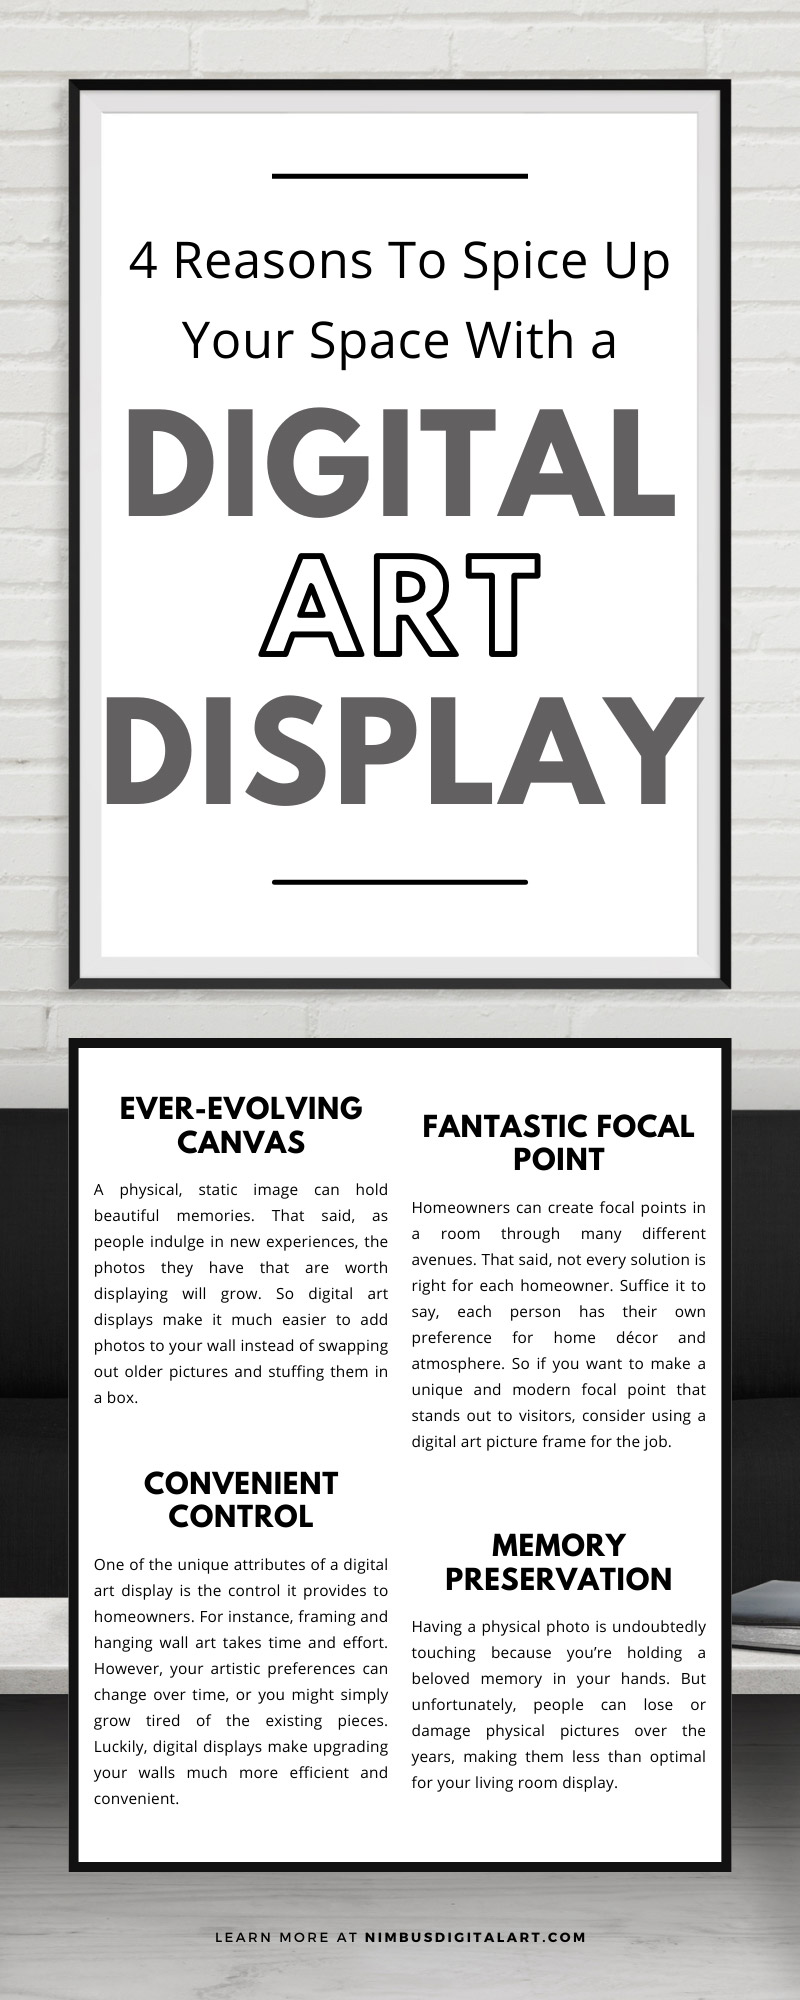 4 Reasons To Spice Up Your Space With a Digital Art Display